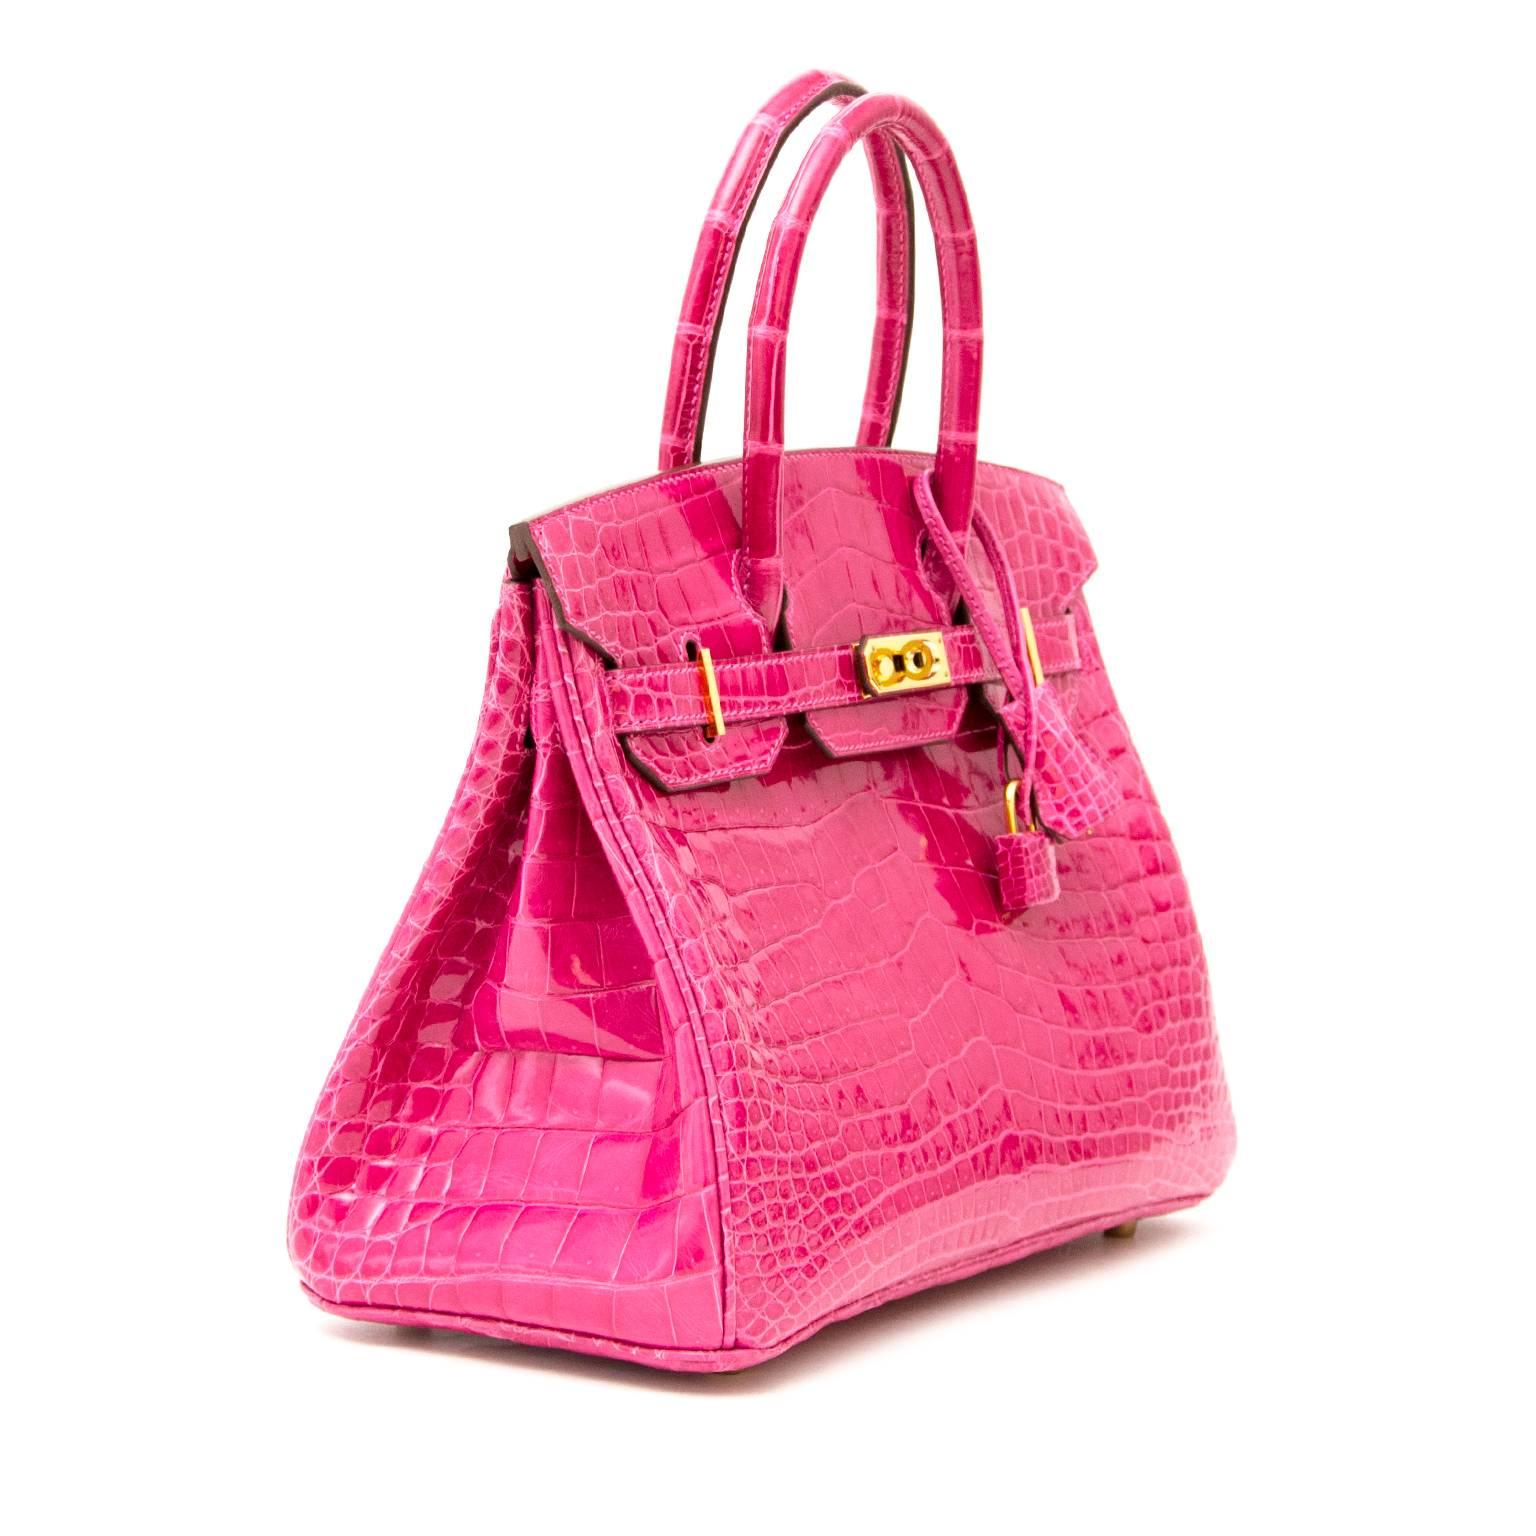 VERY GOOD CONDITION

Hermès Birkin 30 Rose Fuschia Croco Lisse GHW

Turn heads, make waves, carrying this bag will make you feel on top of the world! This gorgeous hard to find Hermes Birin 30 Rose Fuschia Croco Lisse GHW is one of the most coveted